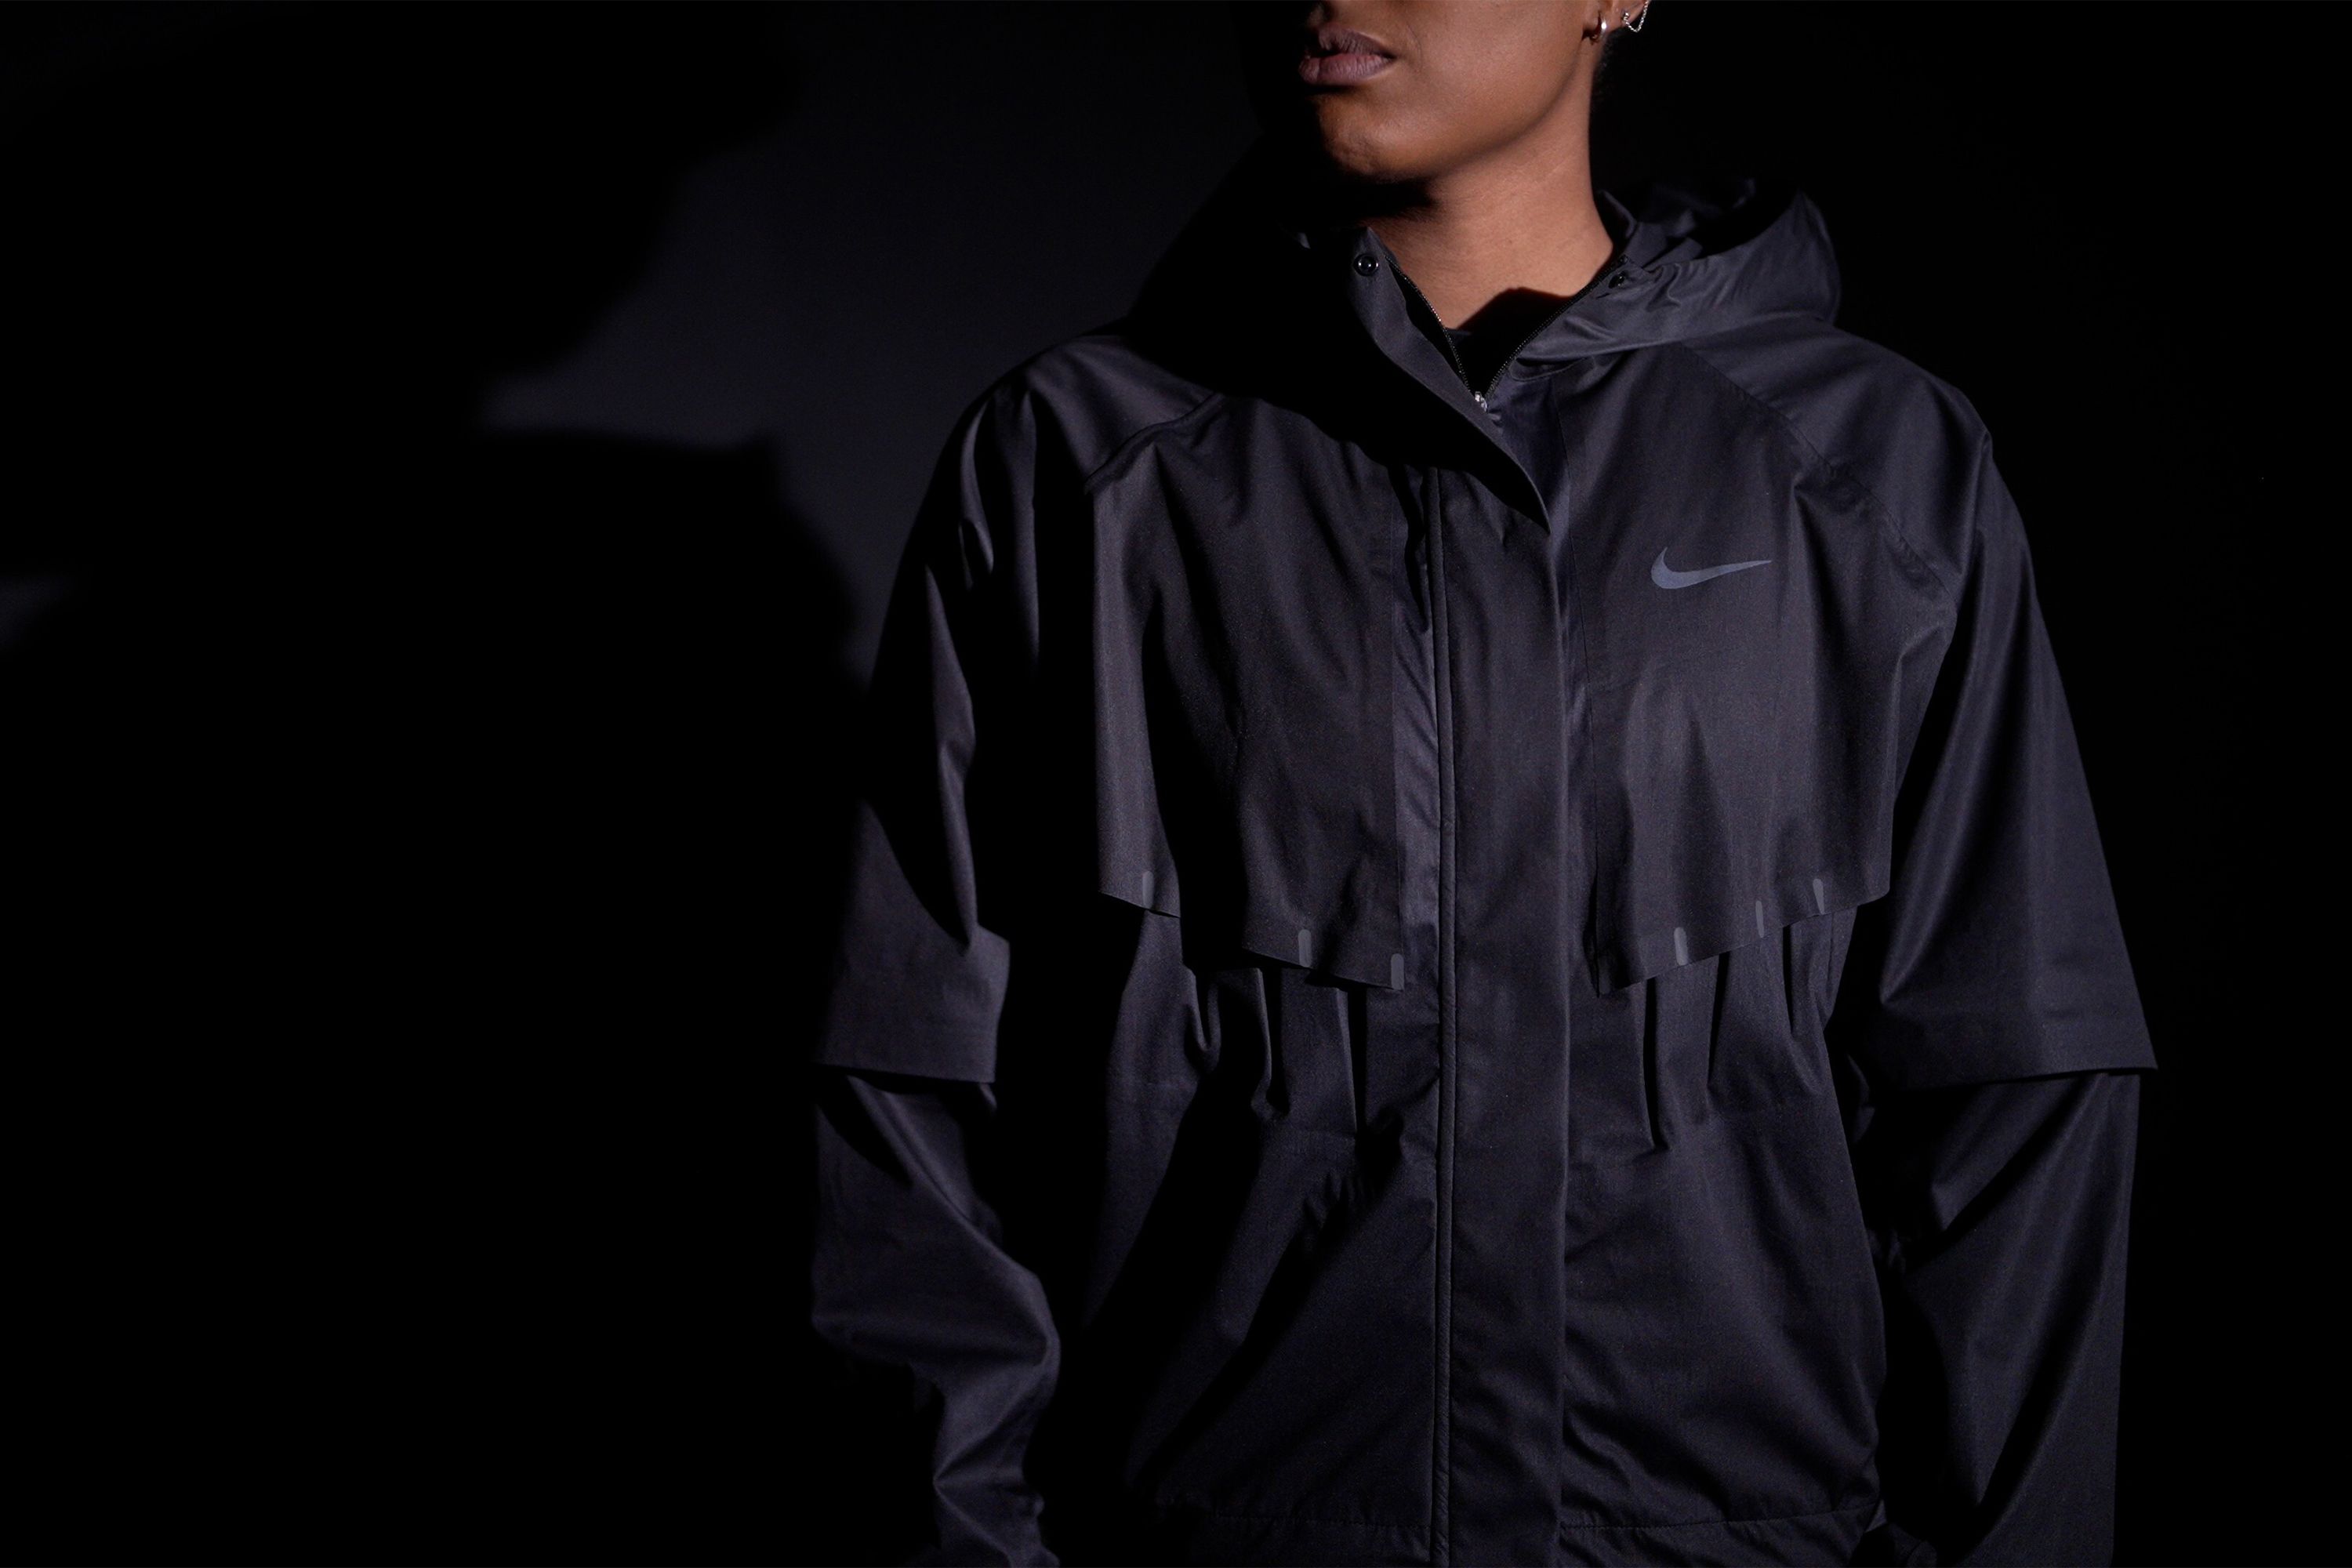 Nike's All-New Aerogami Jacket Has Automatic Vents to Keep You Cool